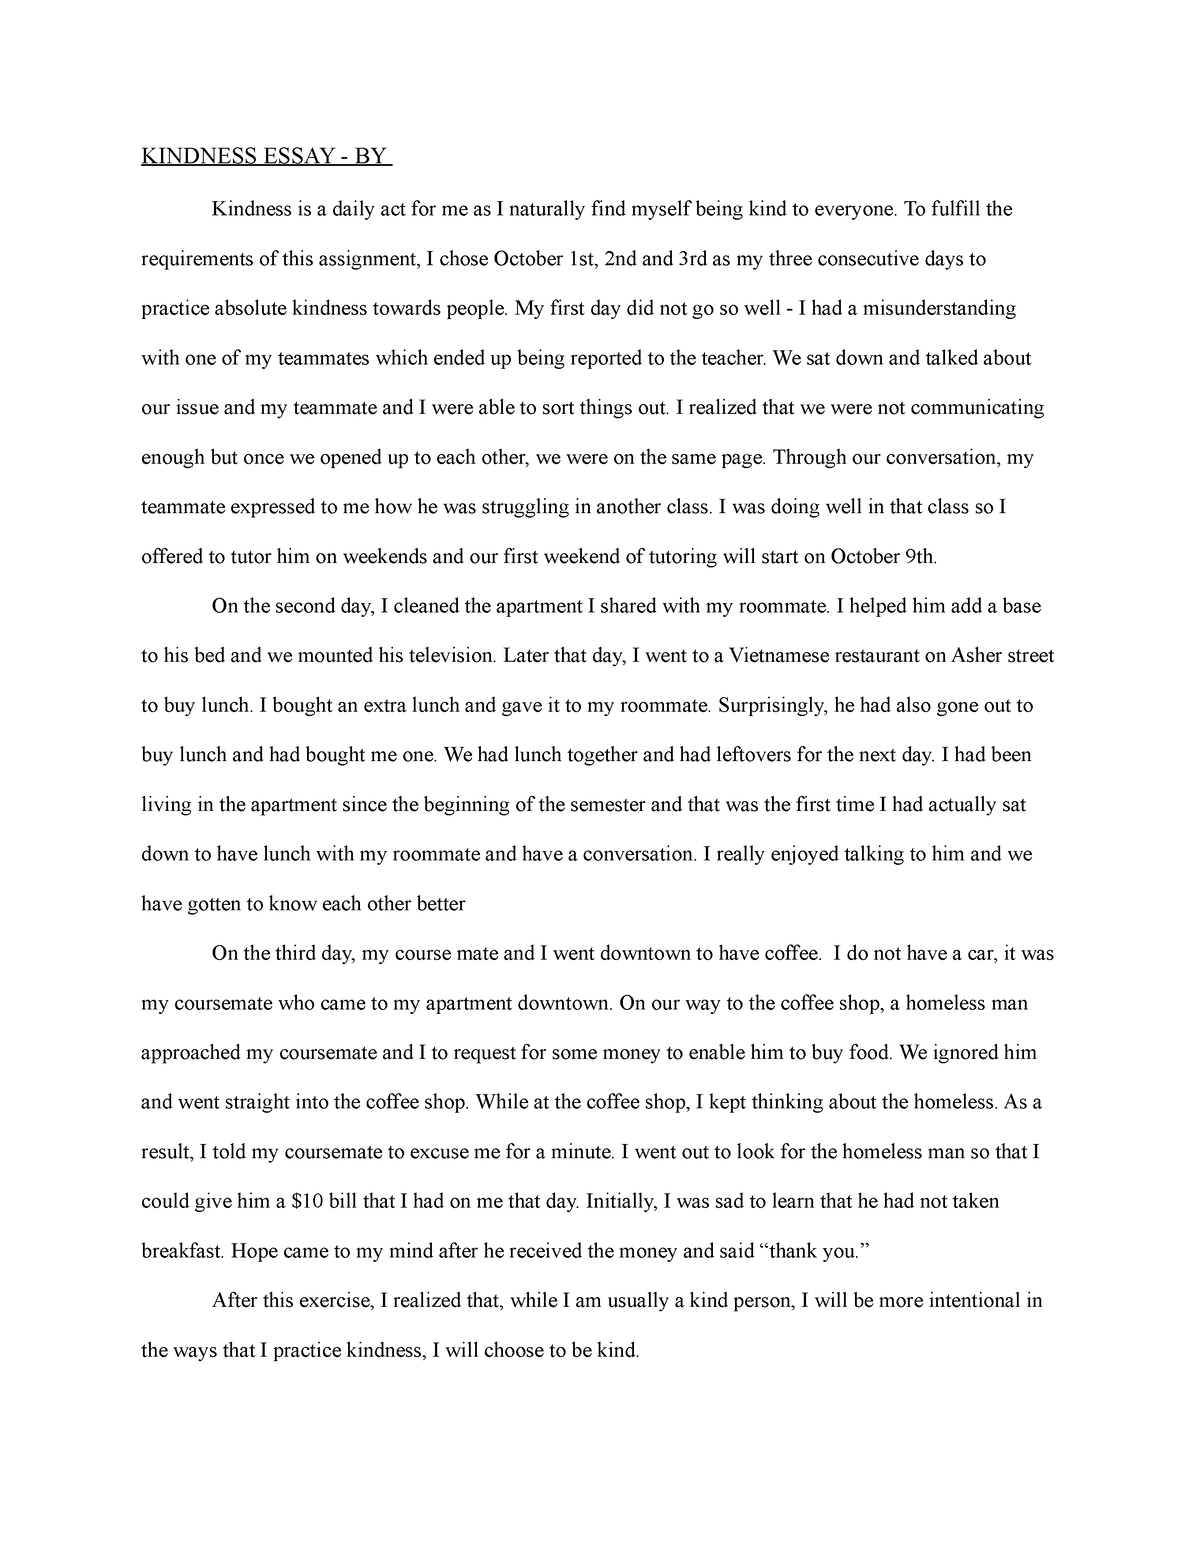 kindness disappearing essay